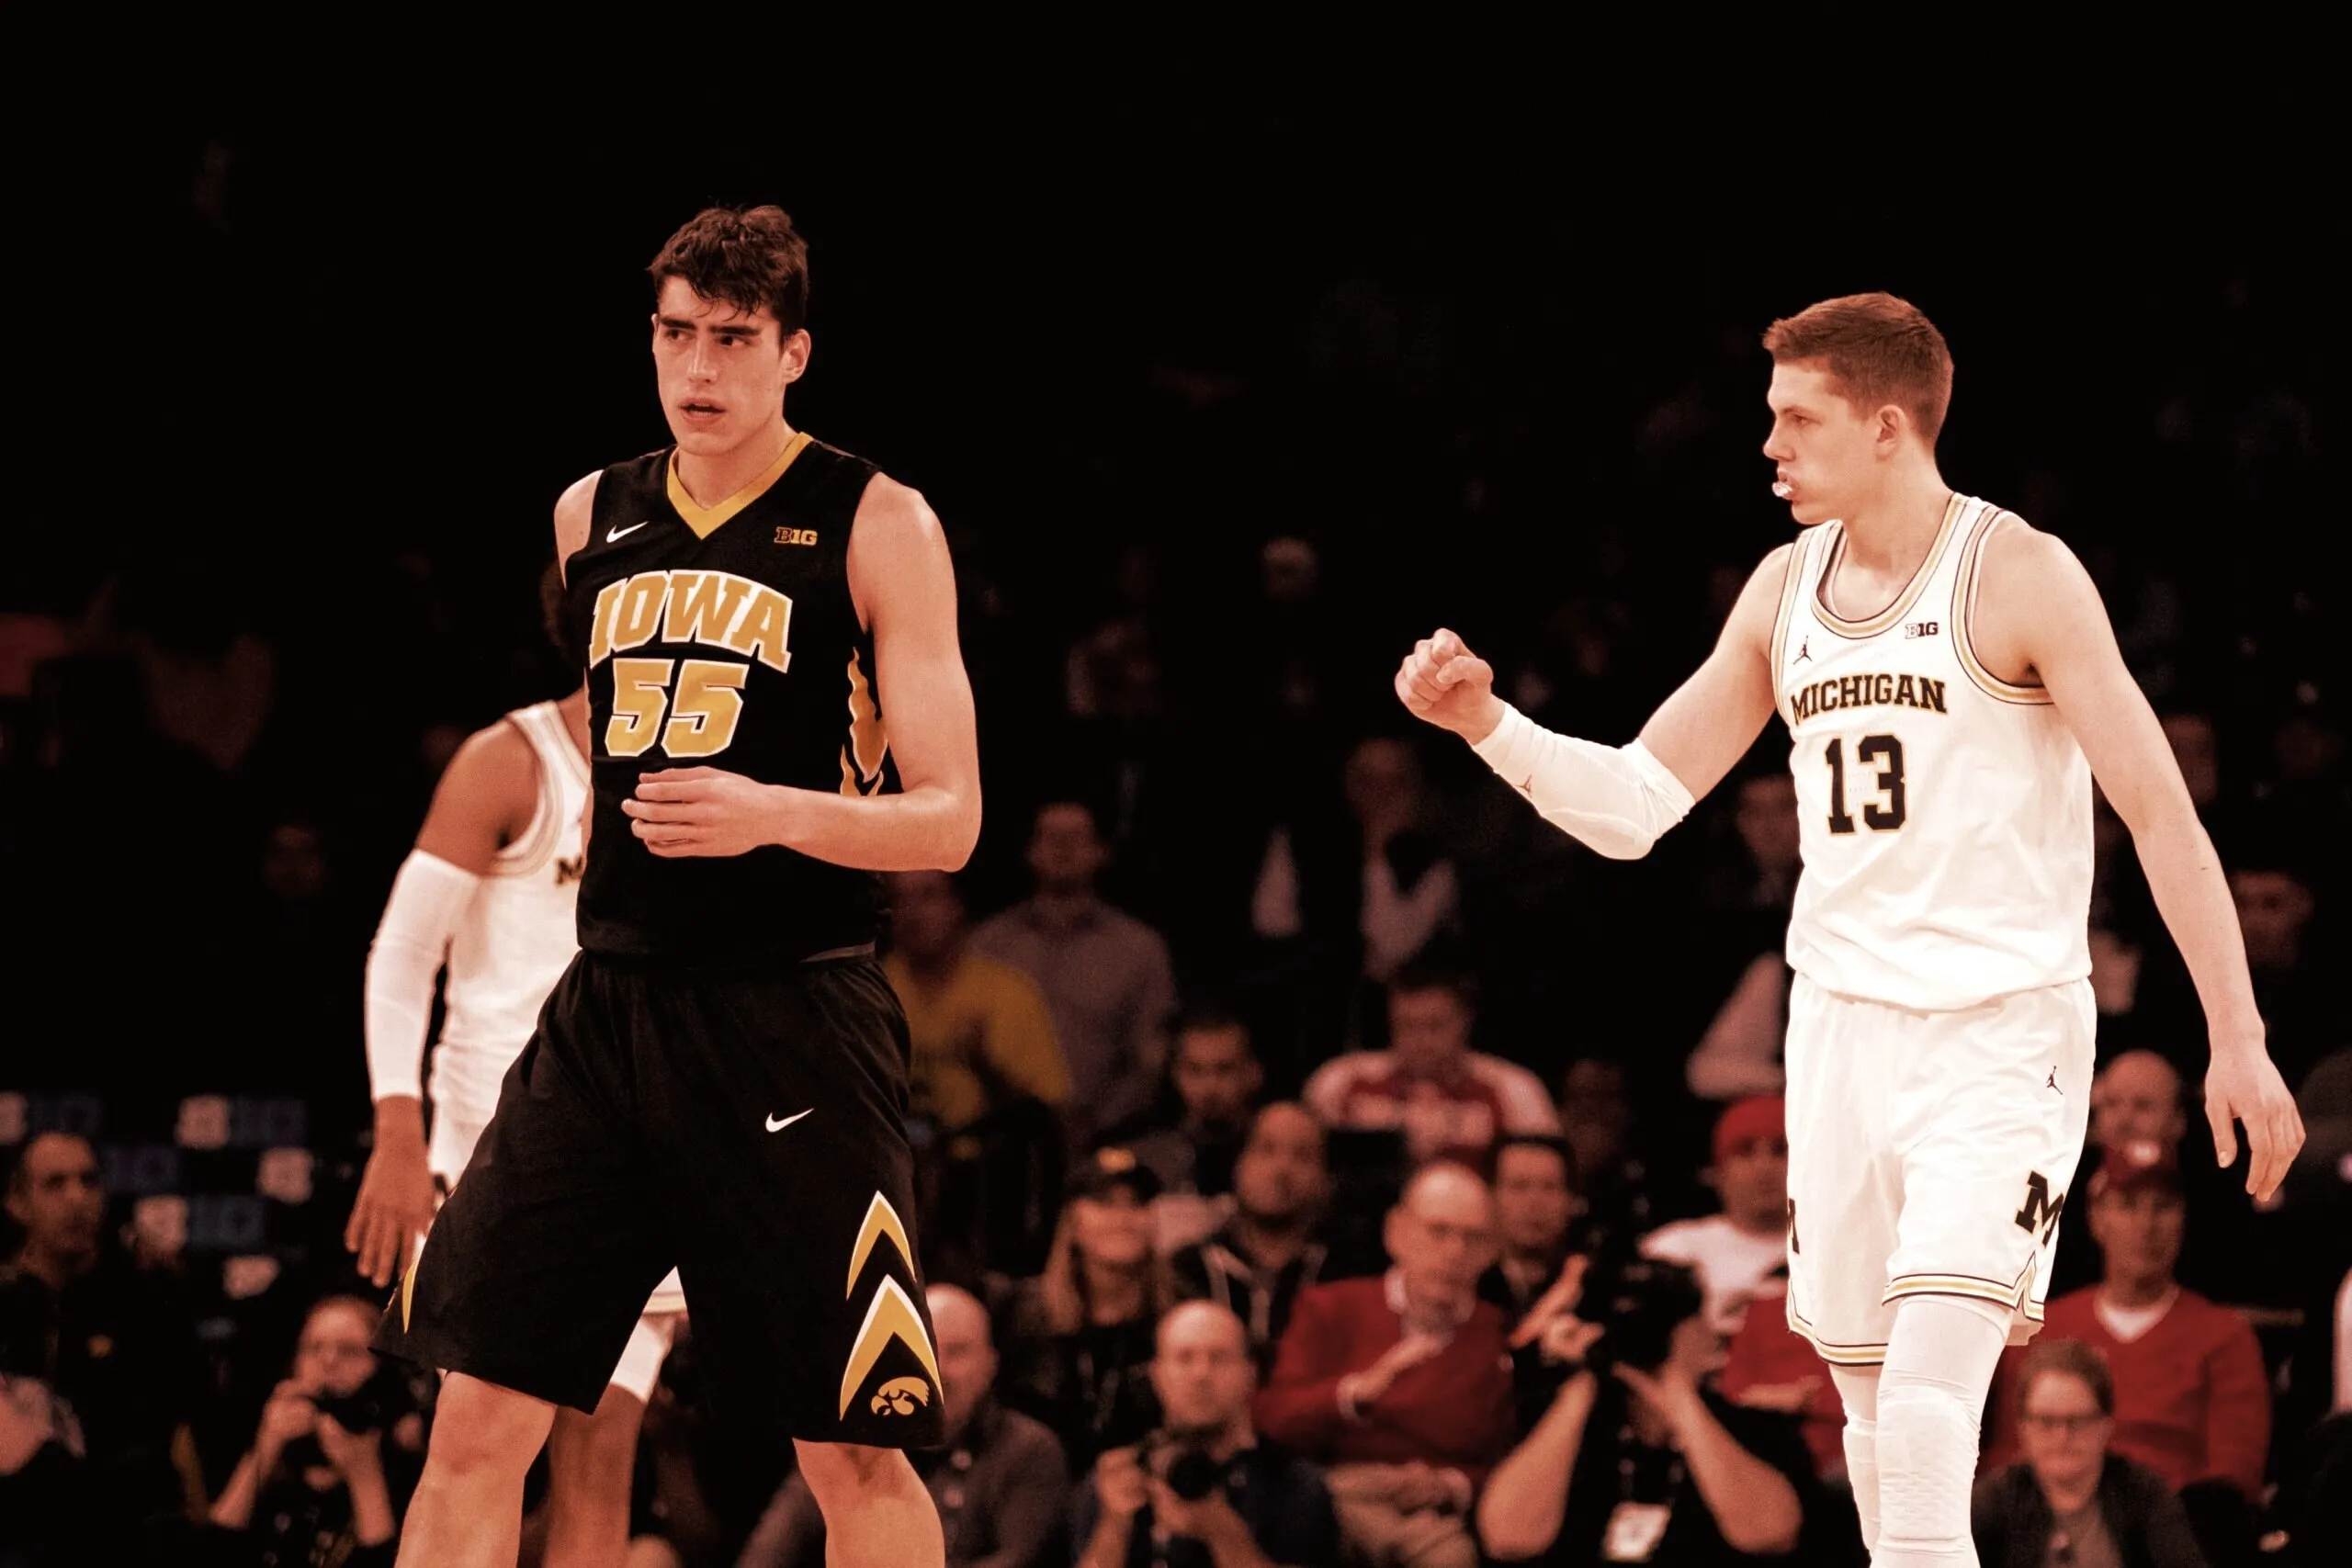 Luka Garza (L) and Moritz Wagner (R) in a March 1, 2018 Big Ten Tournament game between the University of Iowa and the University of Michigan. (Flickr user MGoBlog, CC BY-NC 2.0)